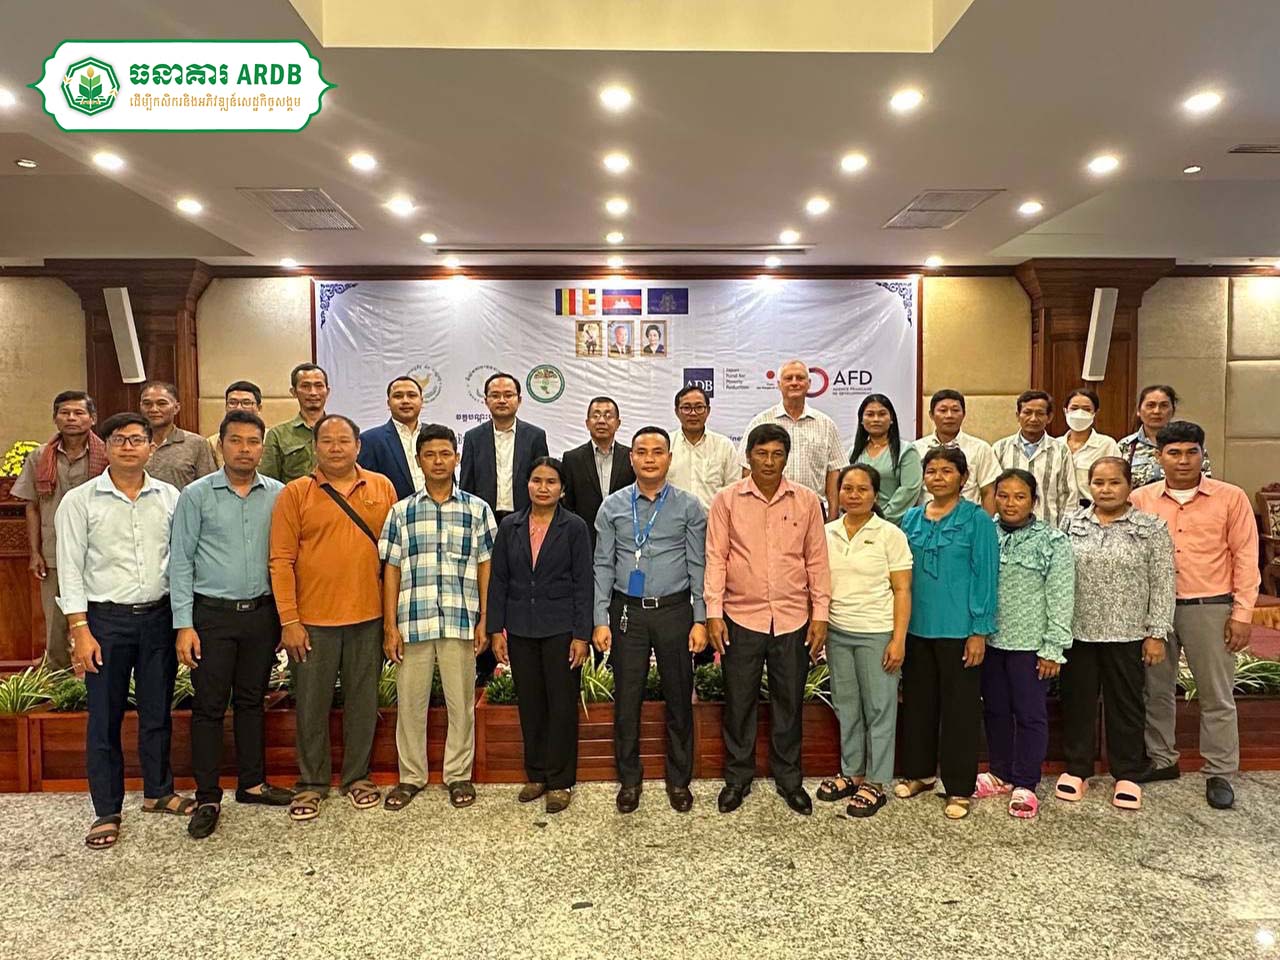 ARDB mobile unit in Siem Reap province, Preah Vihear Province, Oddar Meanchey and ARDB HQ staffs attended the meeting on “Business Proposal preparation”